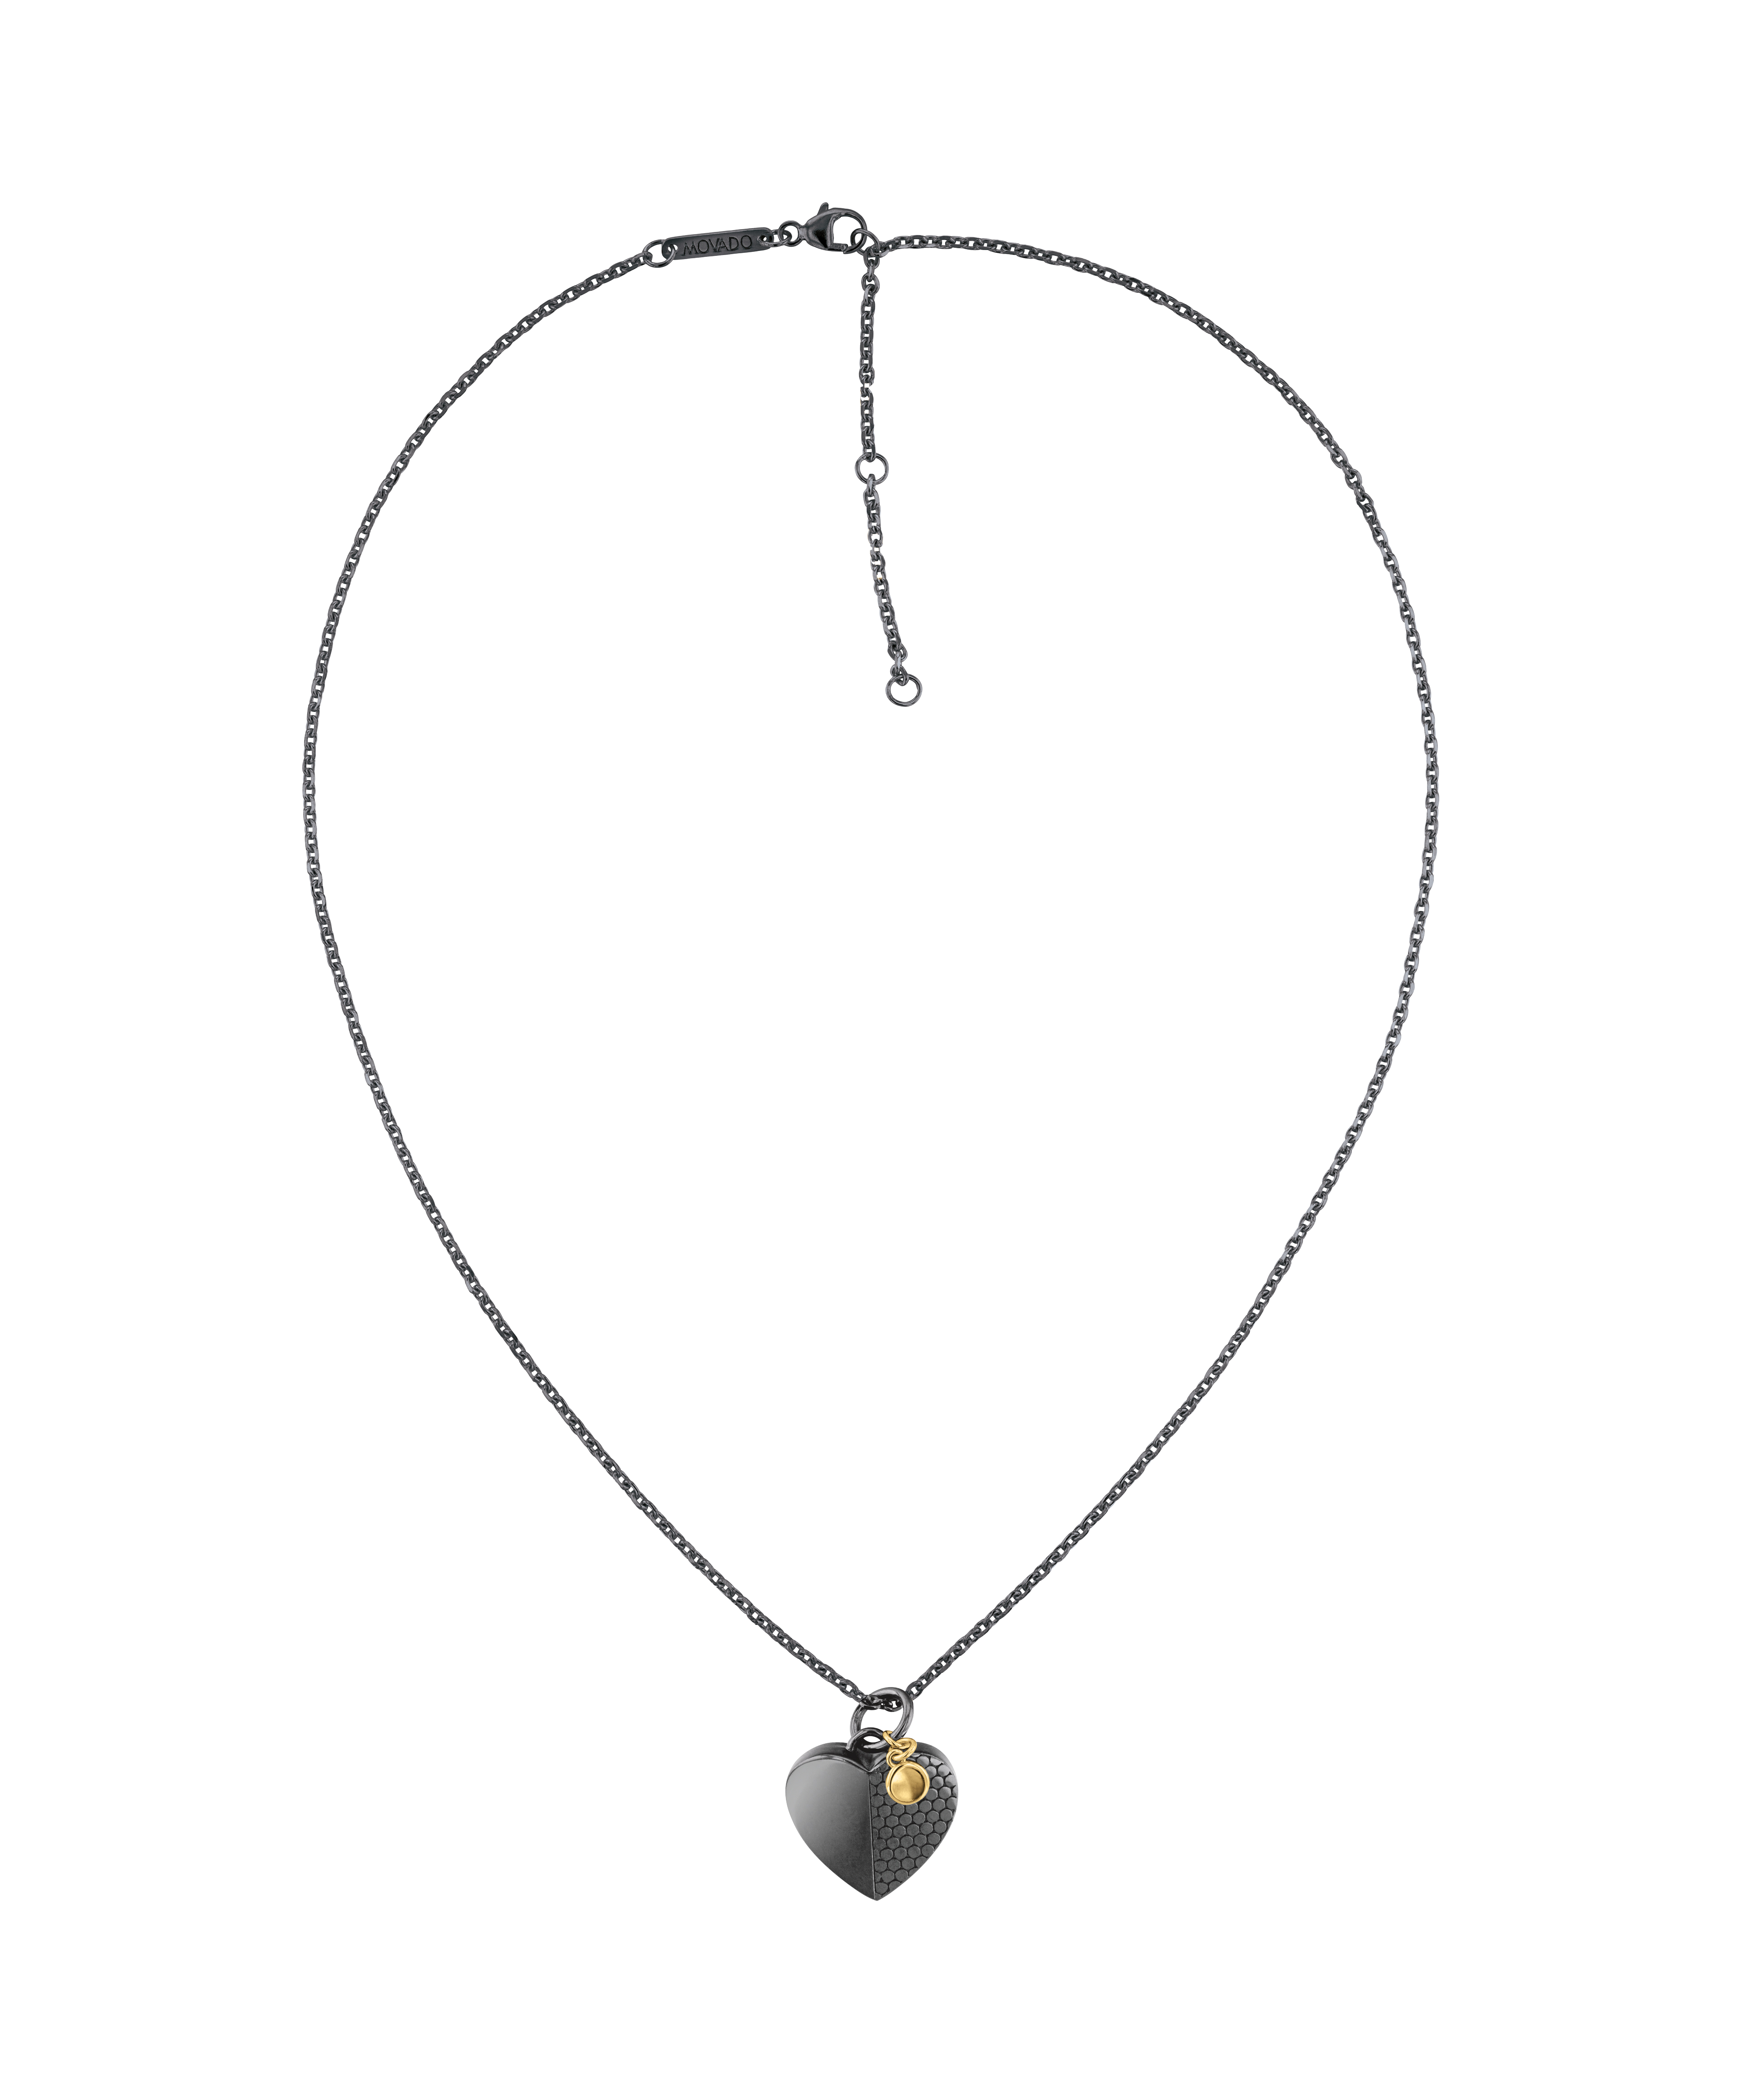 heartbeat necklace with heart